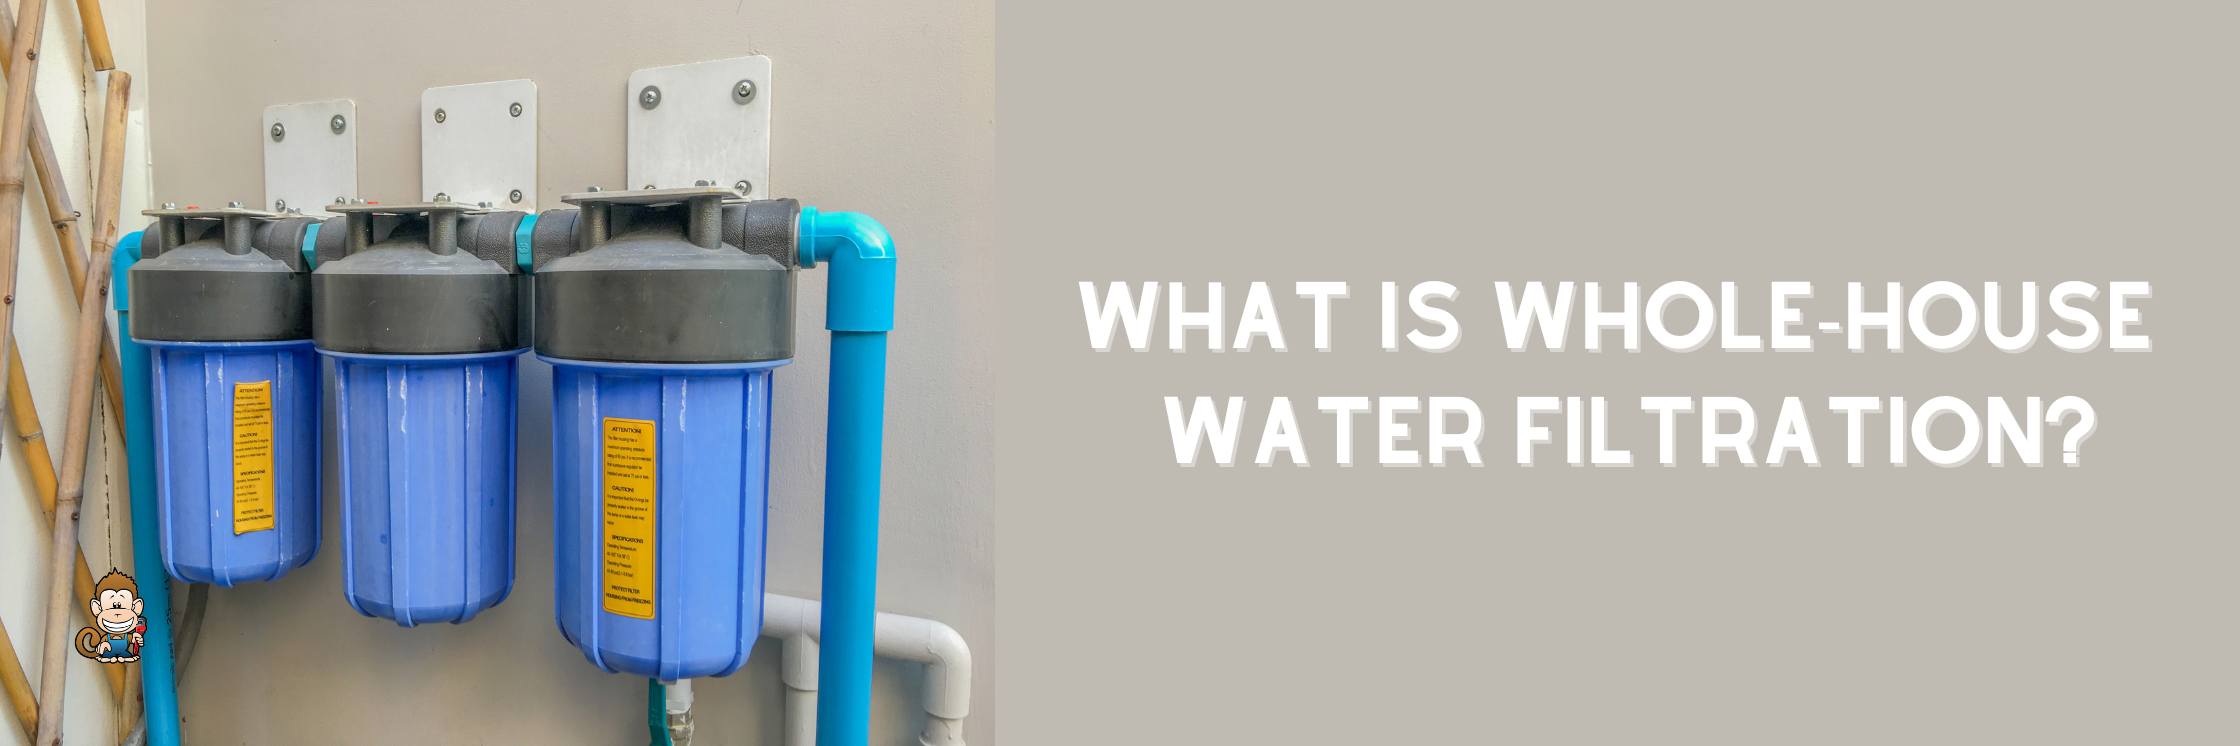 What Is Whole-House Water Filtration?